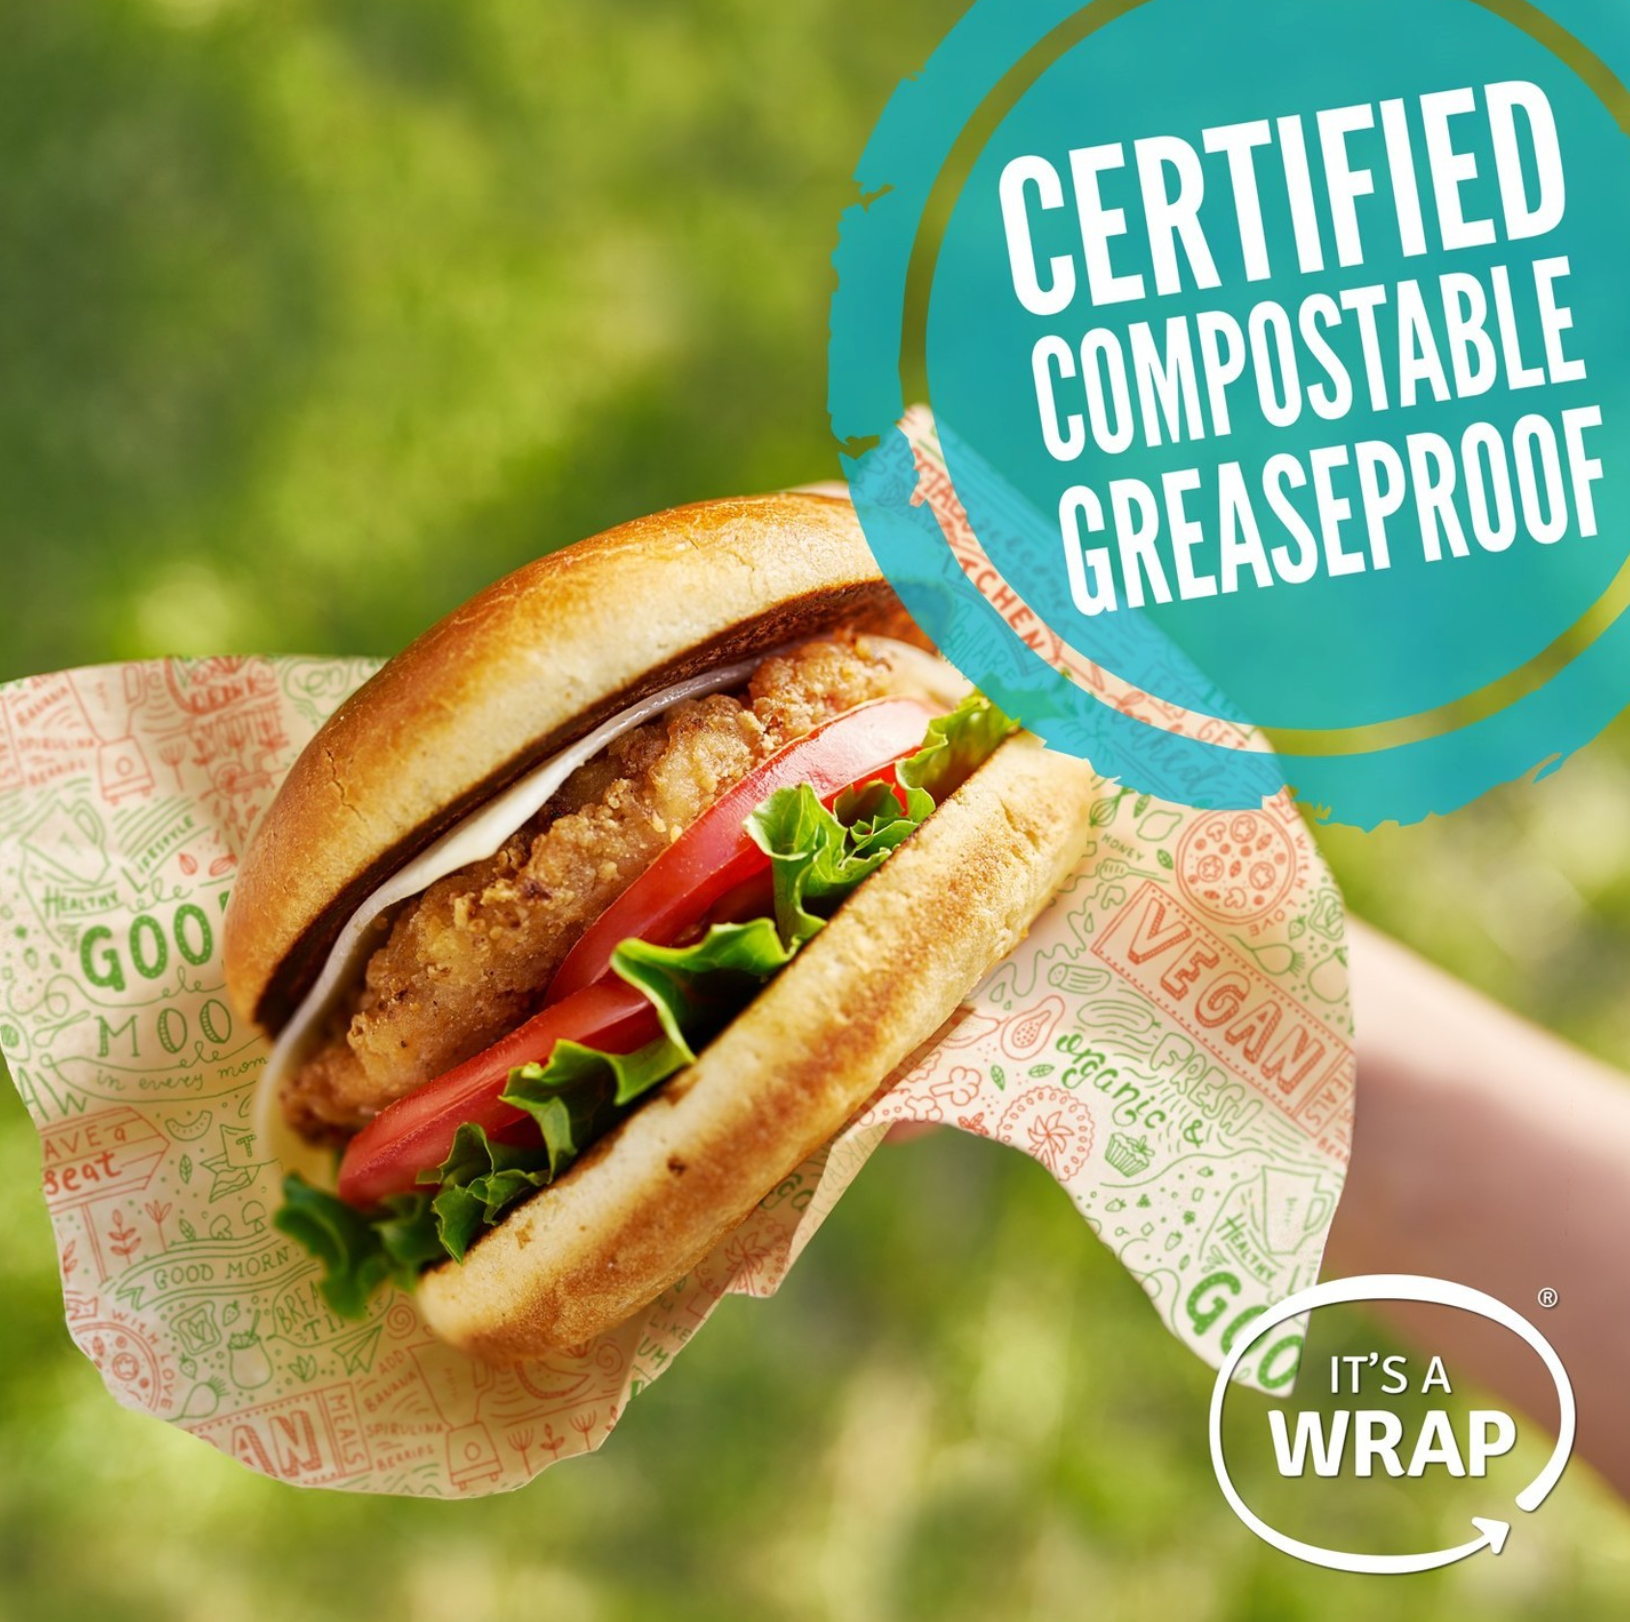 Certified compostable greaseproof for burgers